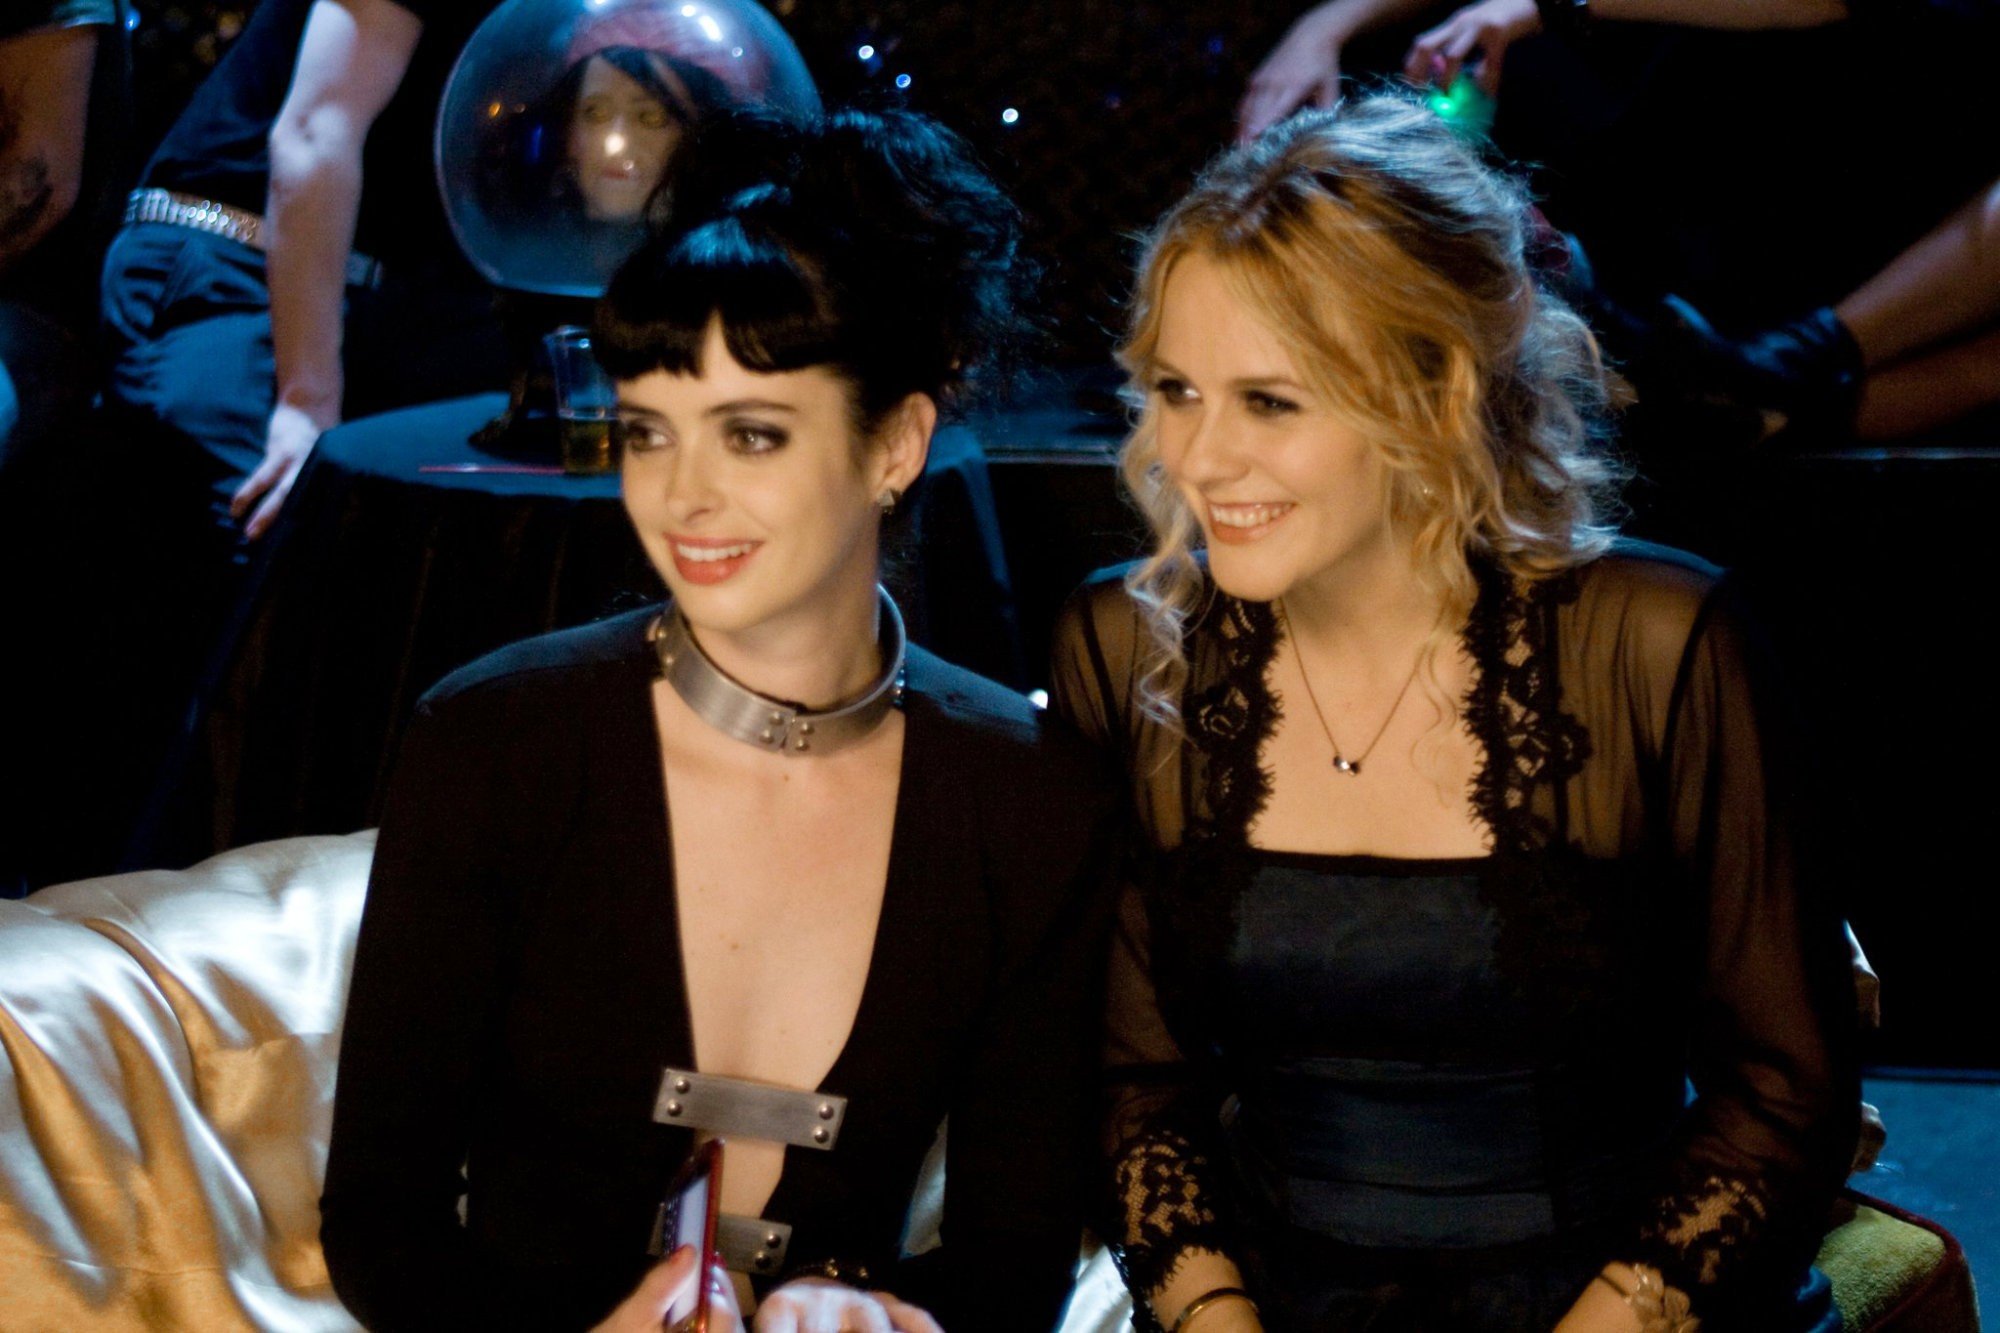 Krysten Ritter stars as Stacy and Alicia Silverstone stars as Goody in Anchor Bay Films' Vamps (2012)